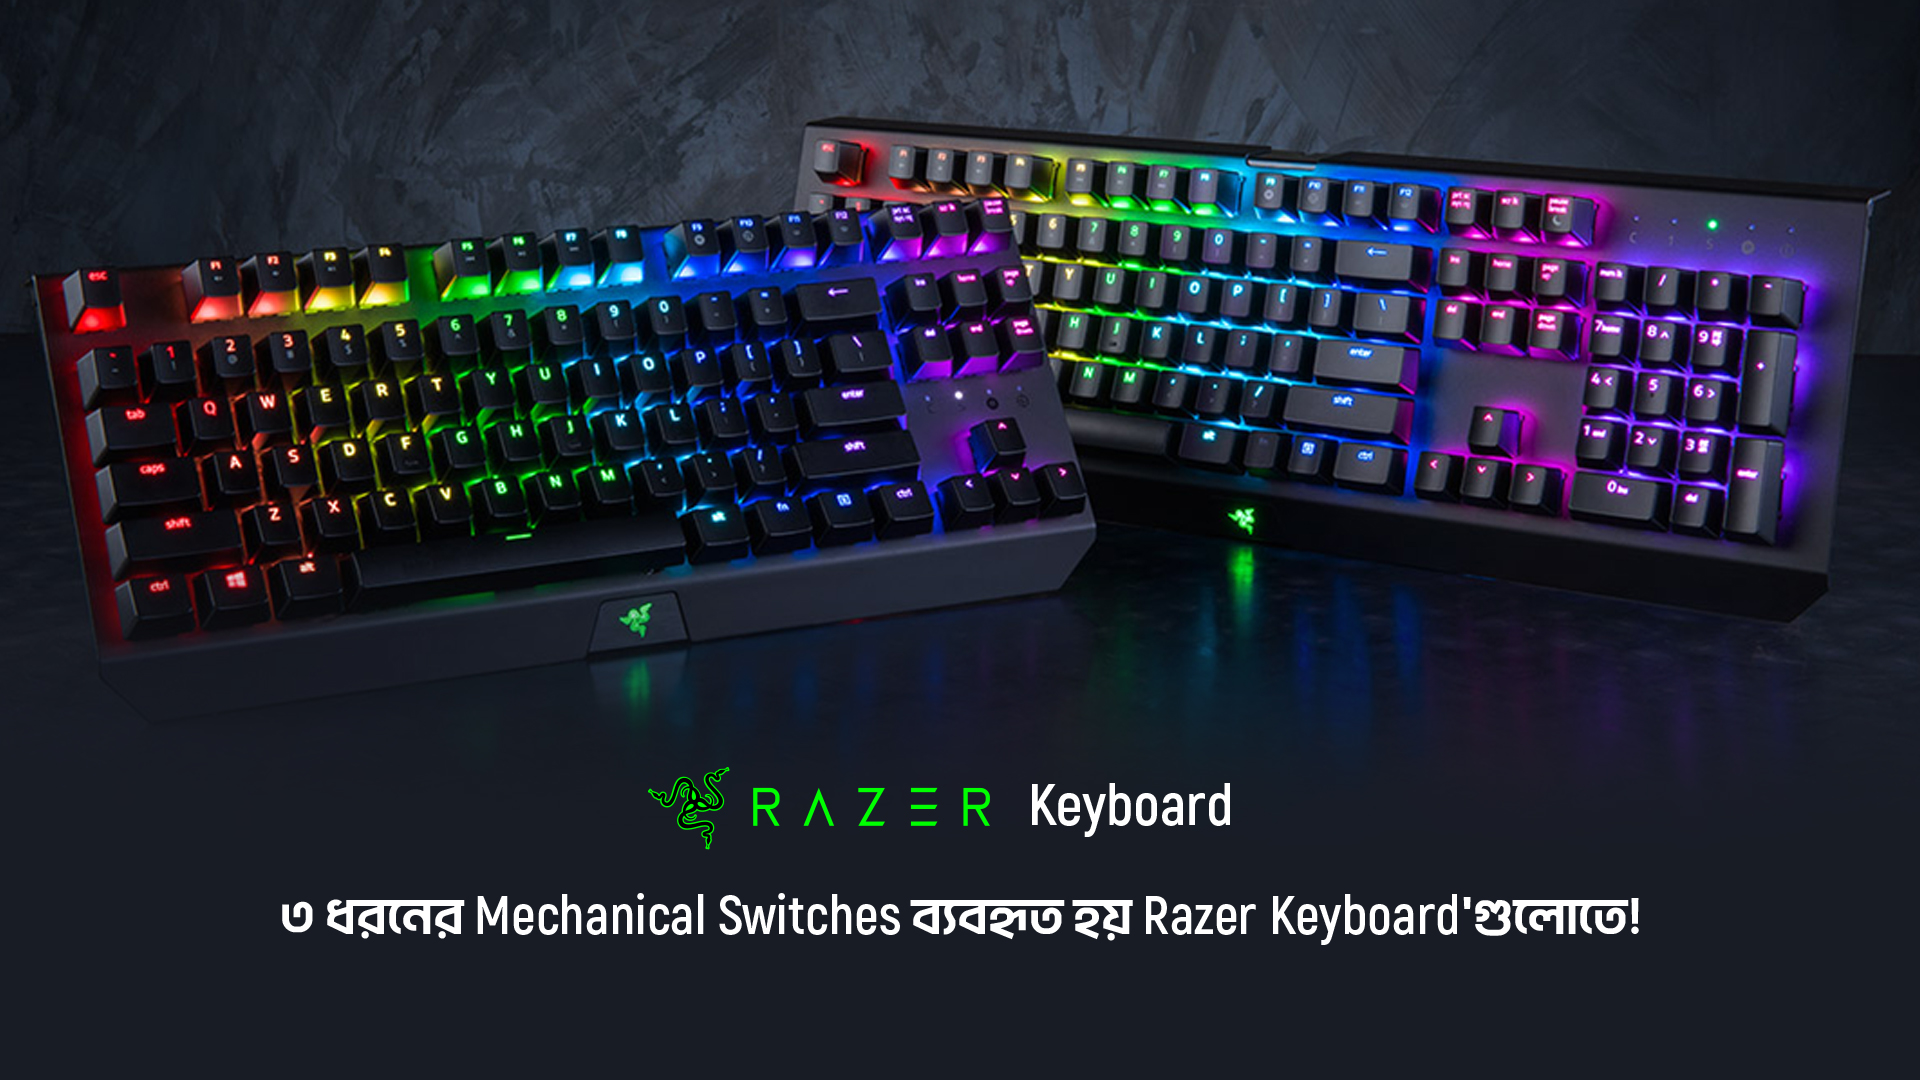 Differences of Switches of Razer Mechanical Keyboard